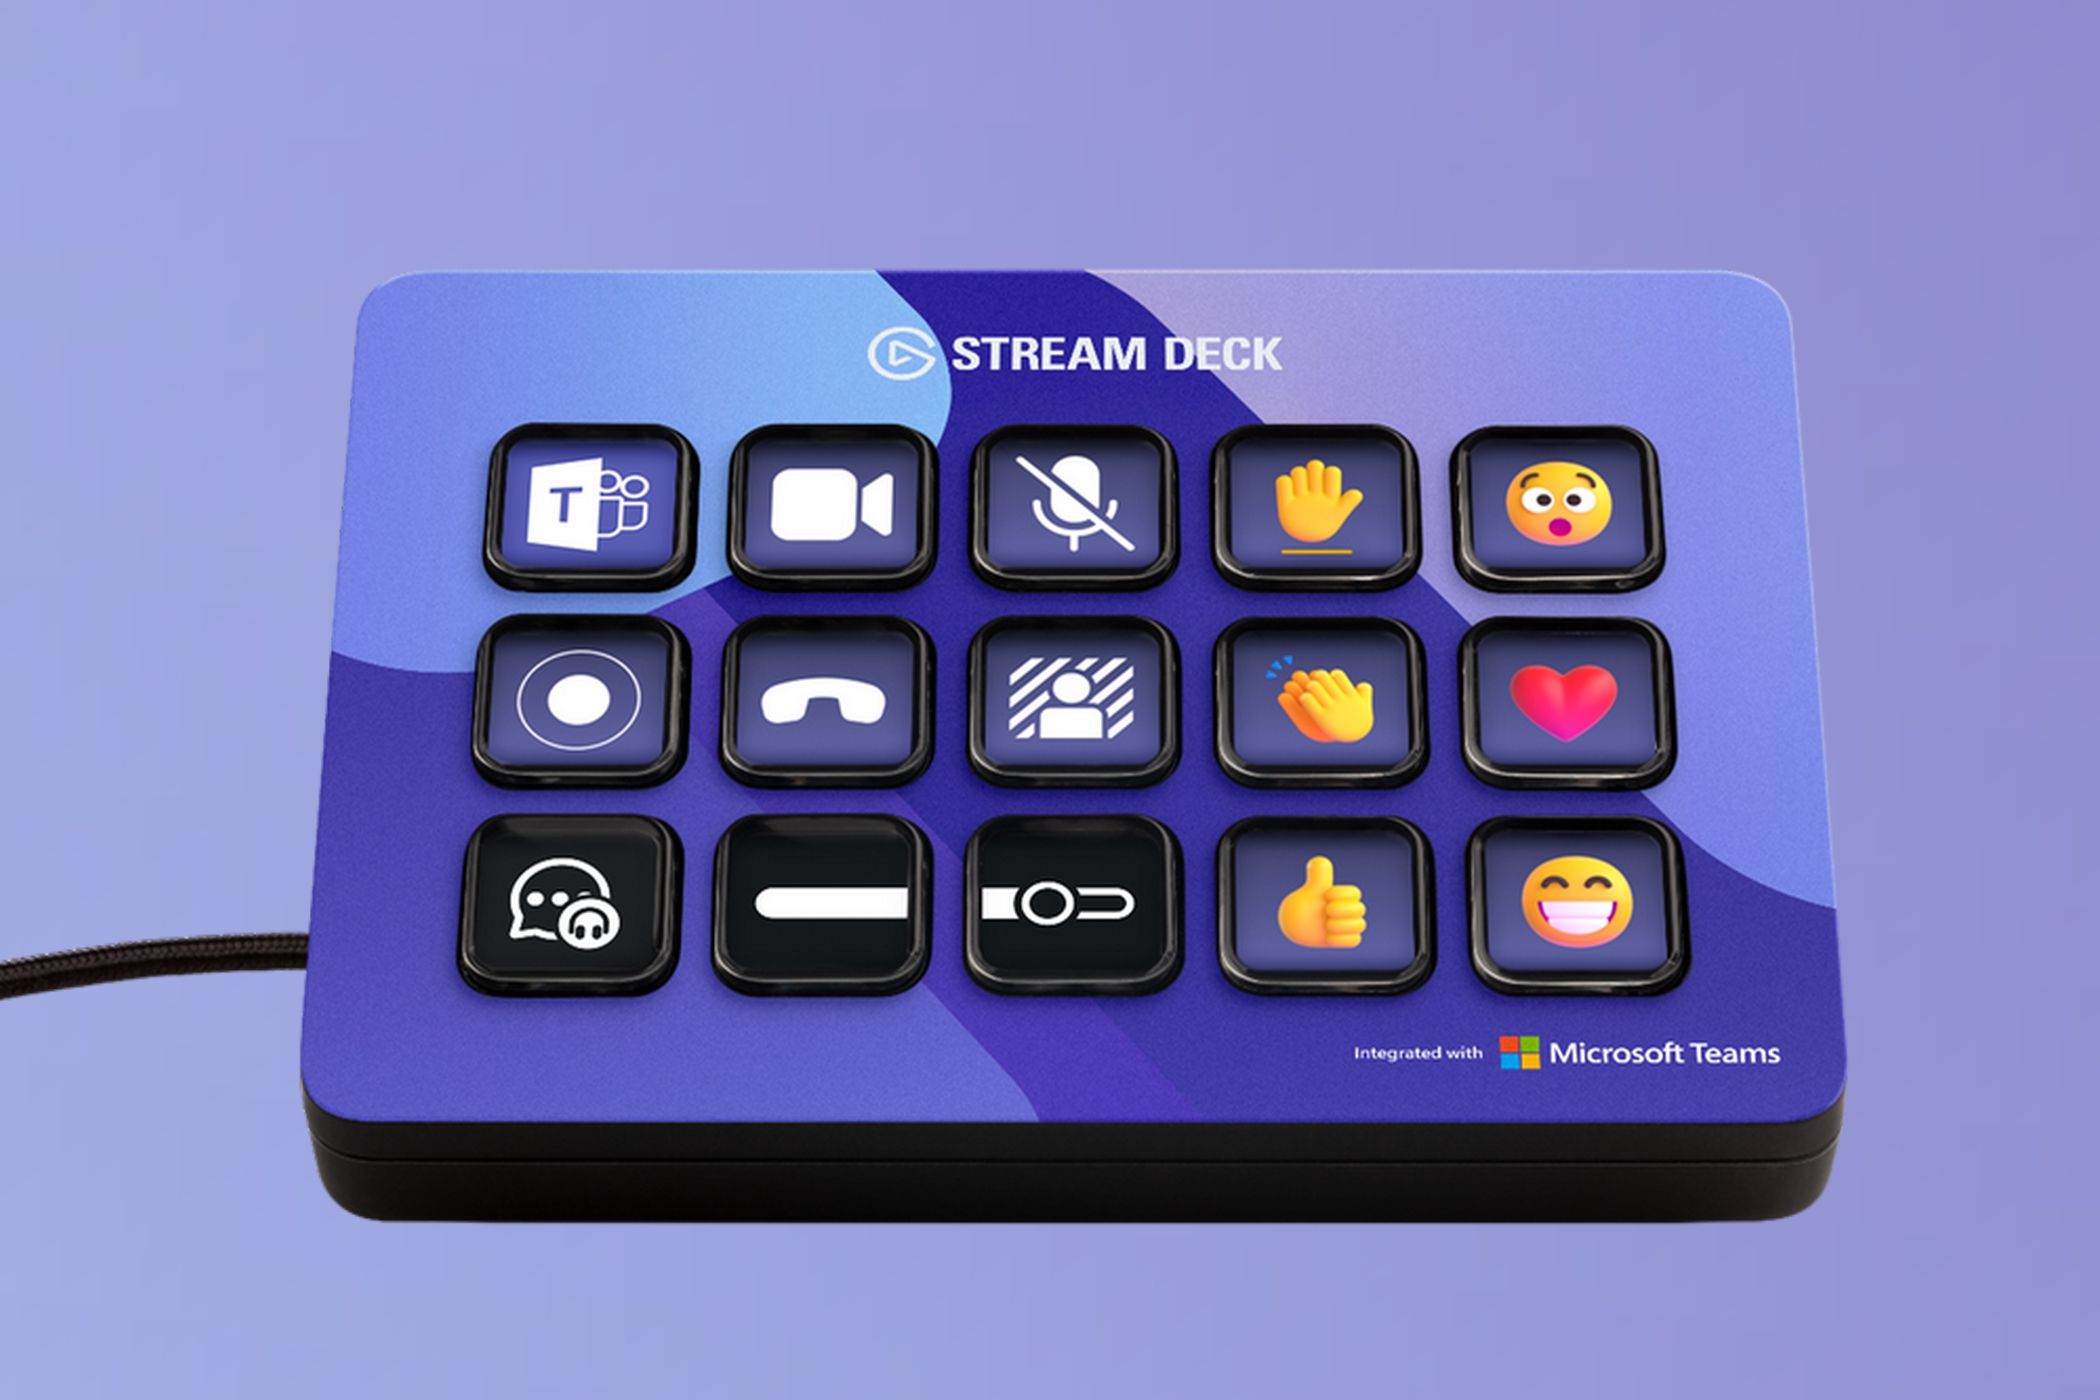 An Elgato Stream Deck showing various shortcuts for actions in Microsoft Teams